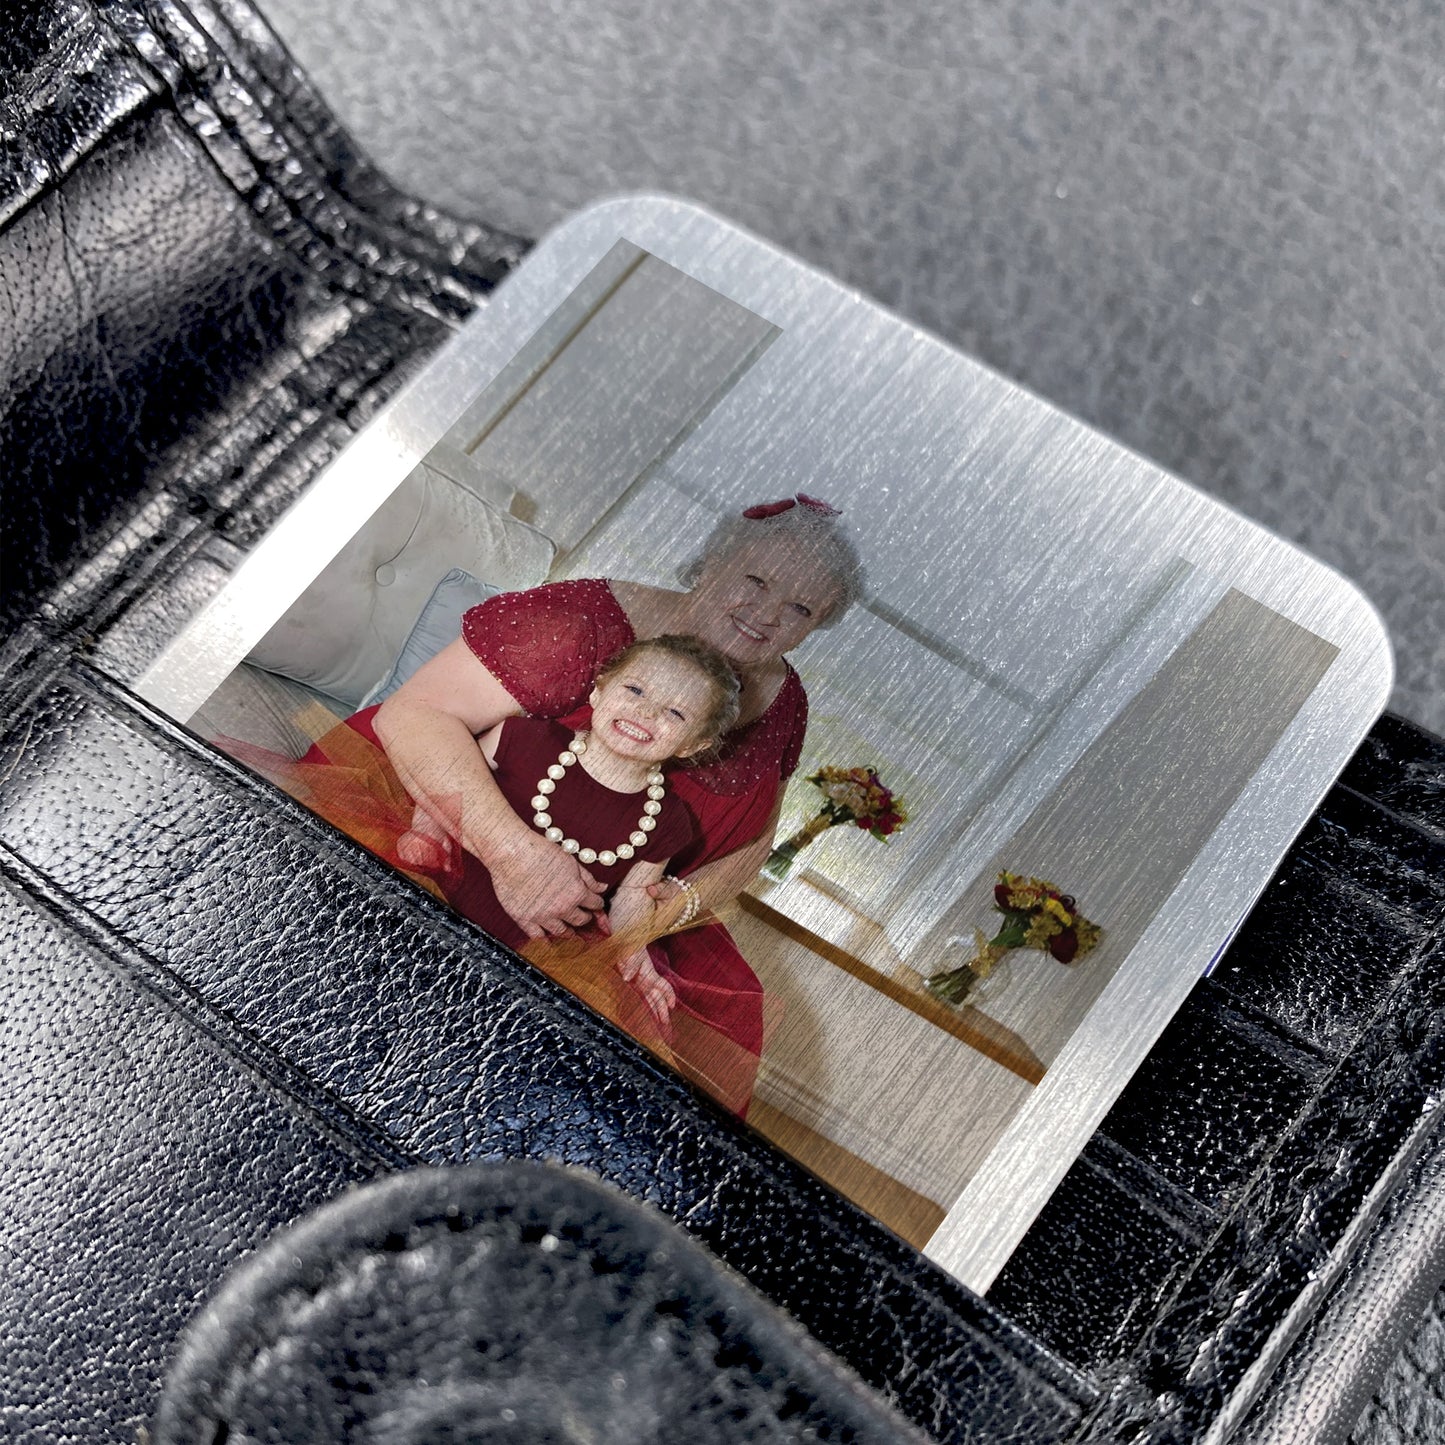 PERSONALISED Photo Wallet Card Nanny Mothers Day Birthday Gift